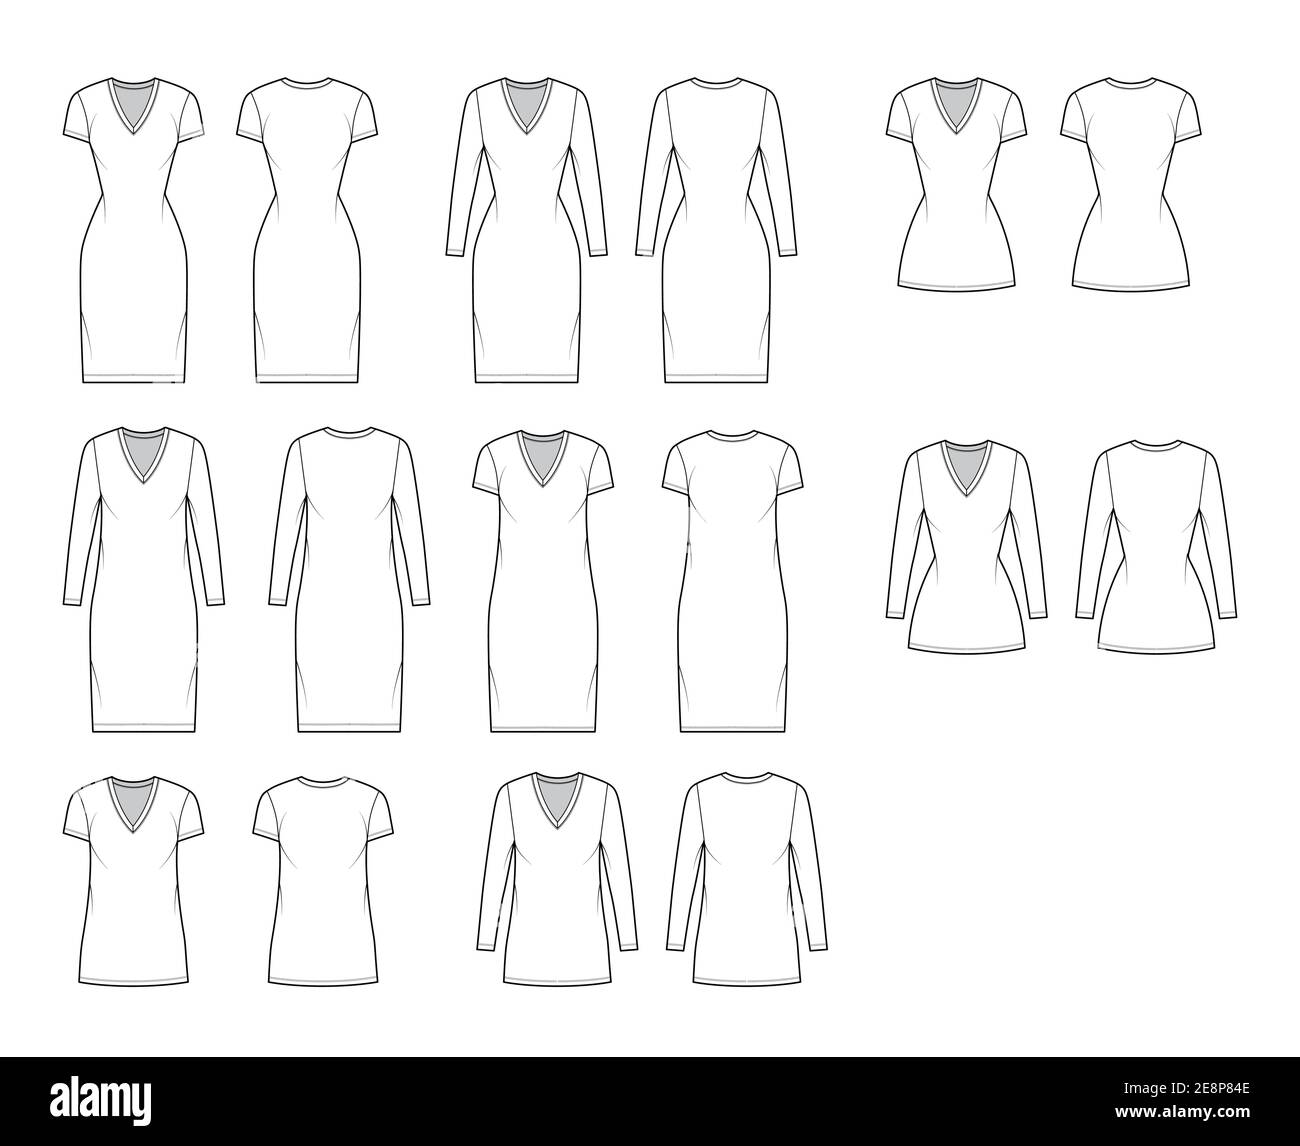 T-shirt dress technical fashion illustration with V-neck, long, short sleeves, knee, mini length, oversized, fitted body, Pencil fullness. Flat template front, back, white color. Women, men CAD mockup Stock Vector